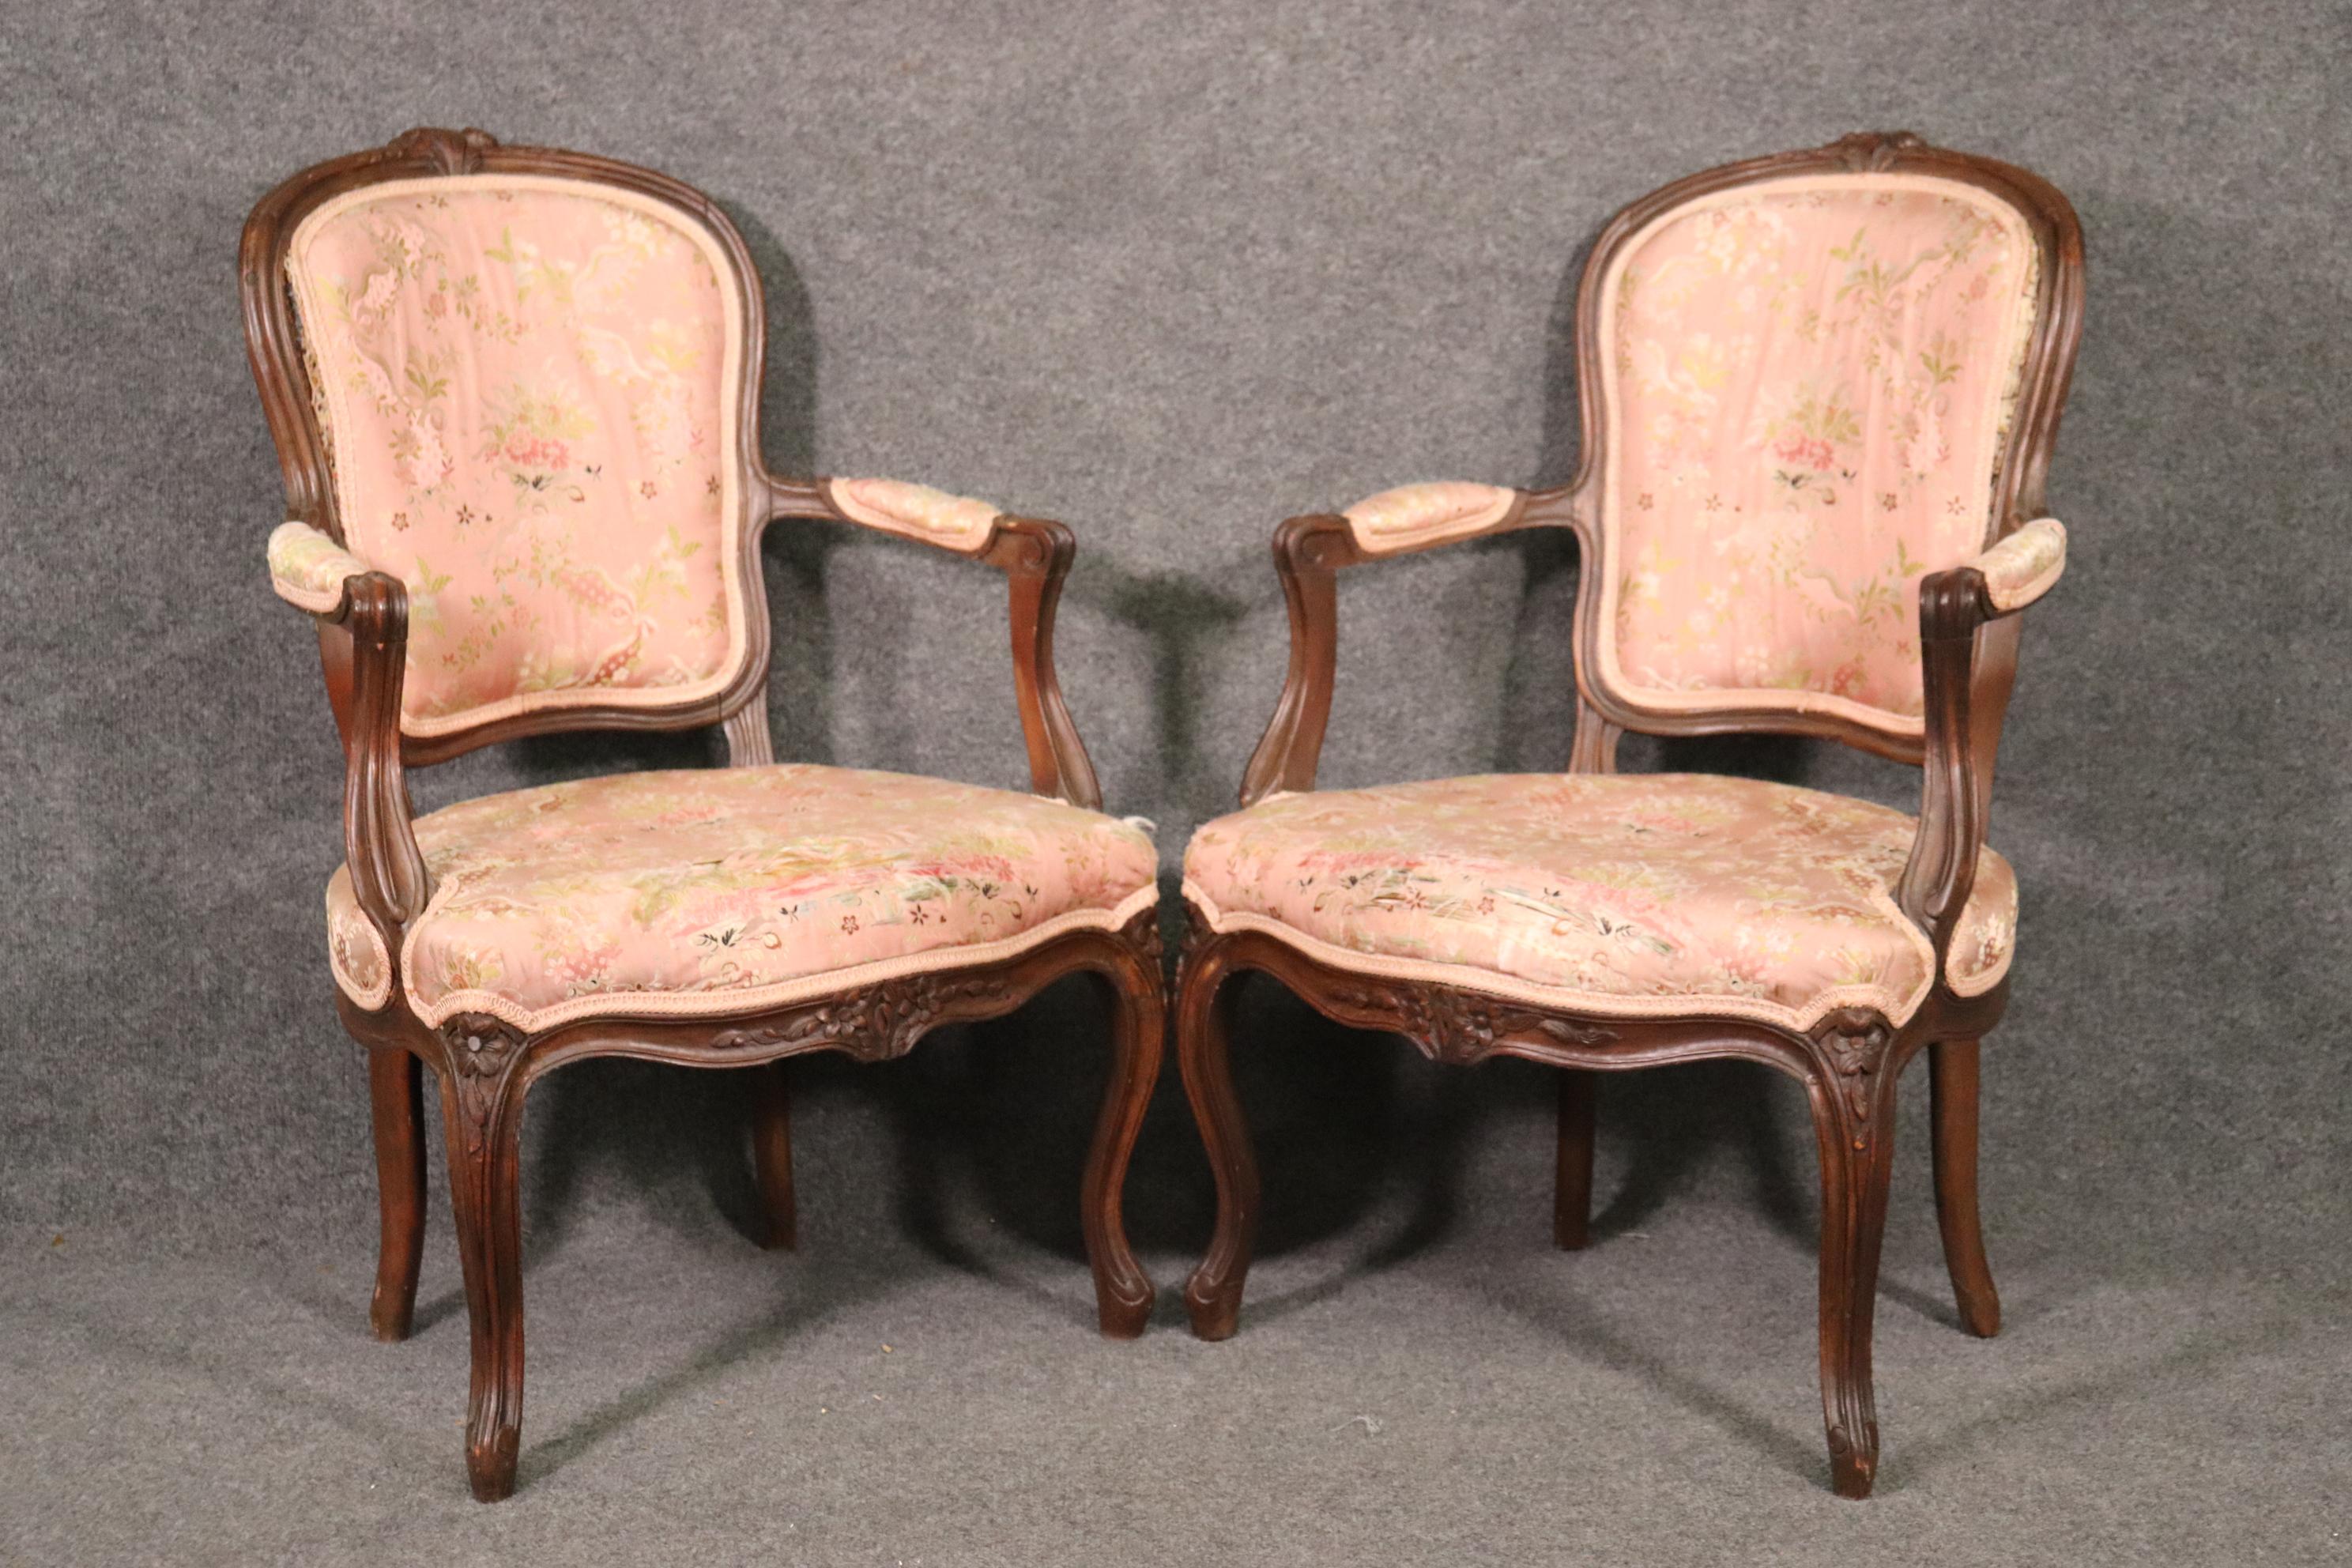 These antiqe chairs are in good condition as far as the franes are concerned, but will be needing new upholsetry. That means its a great chance to put your touch on them! They each measure 35.5 tall x 26 wide x 23.5 deep x seat height is 16.